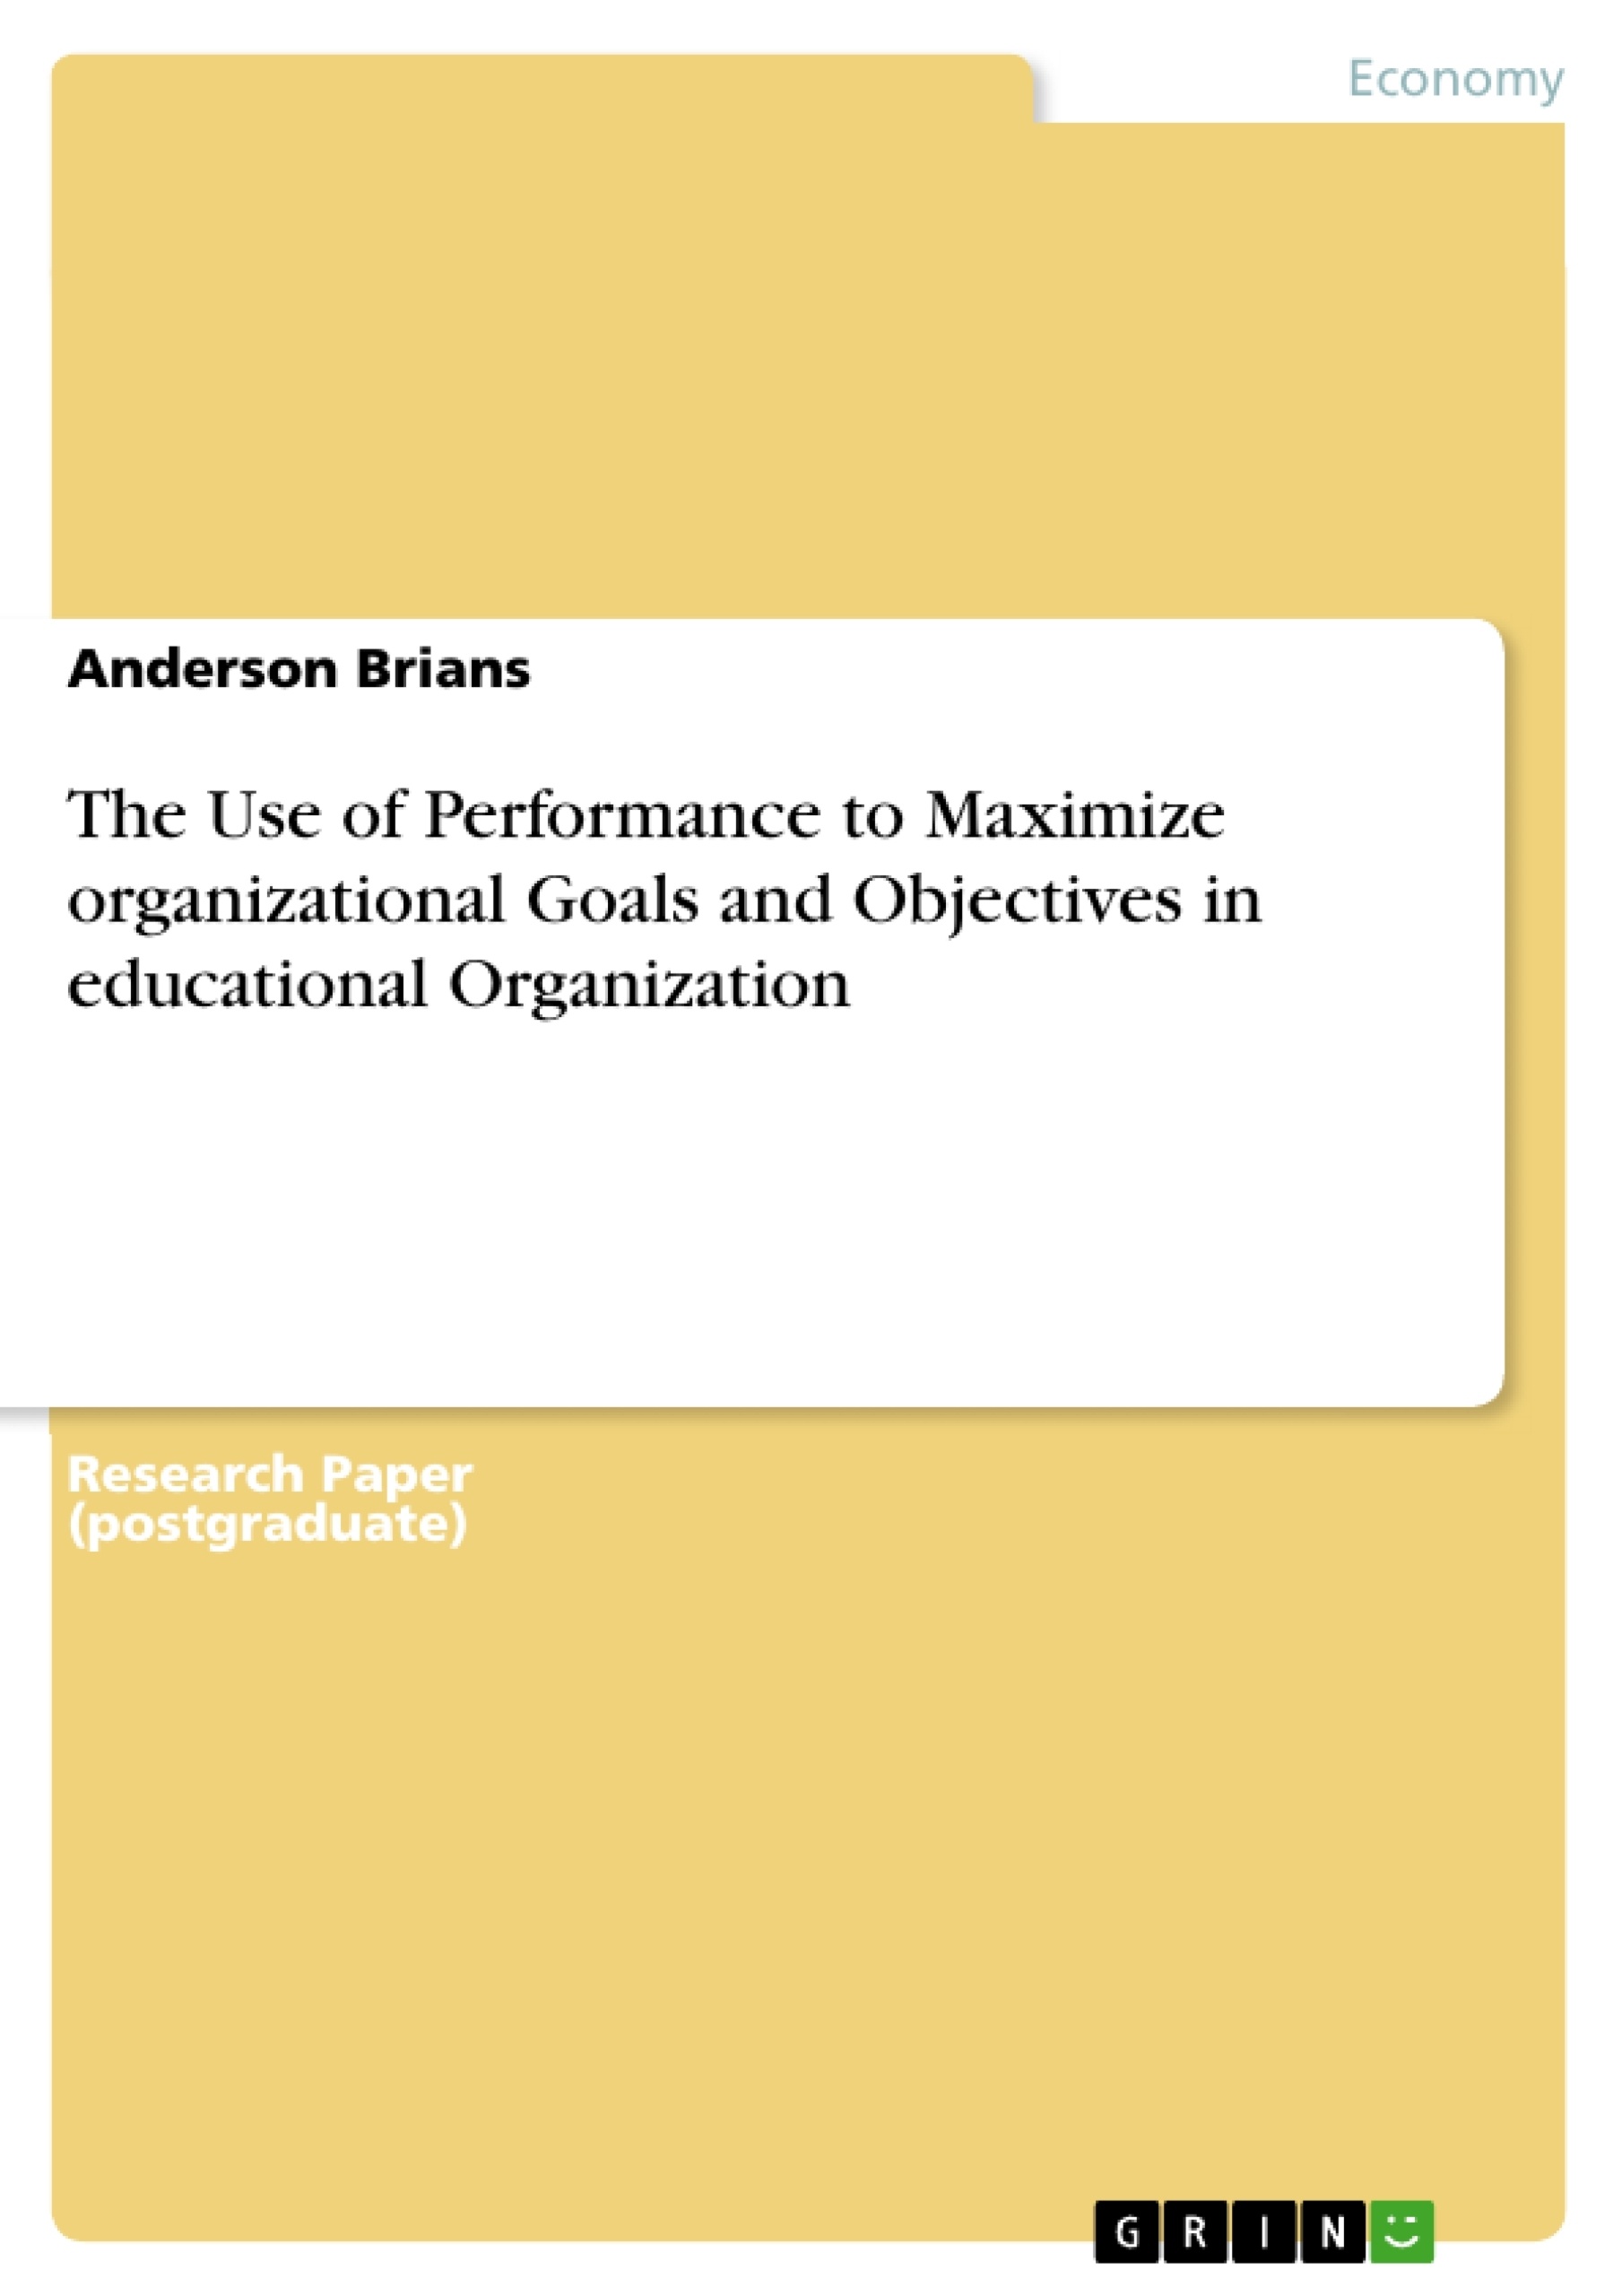 Title: The Use of Performance to Maximize organizational Goals and Objectives in educational Organization